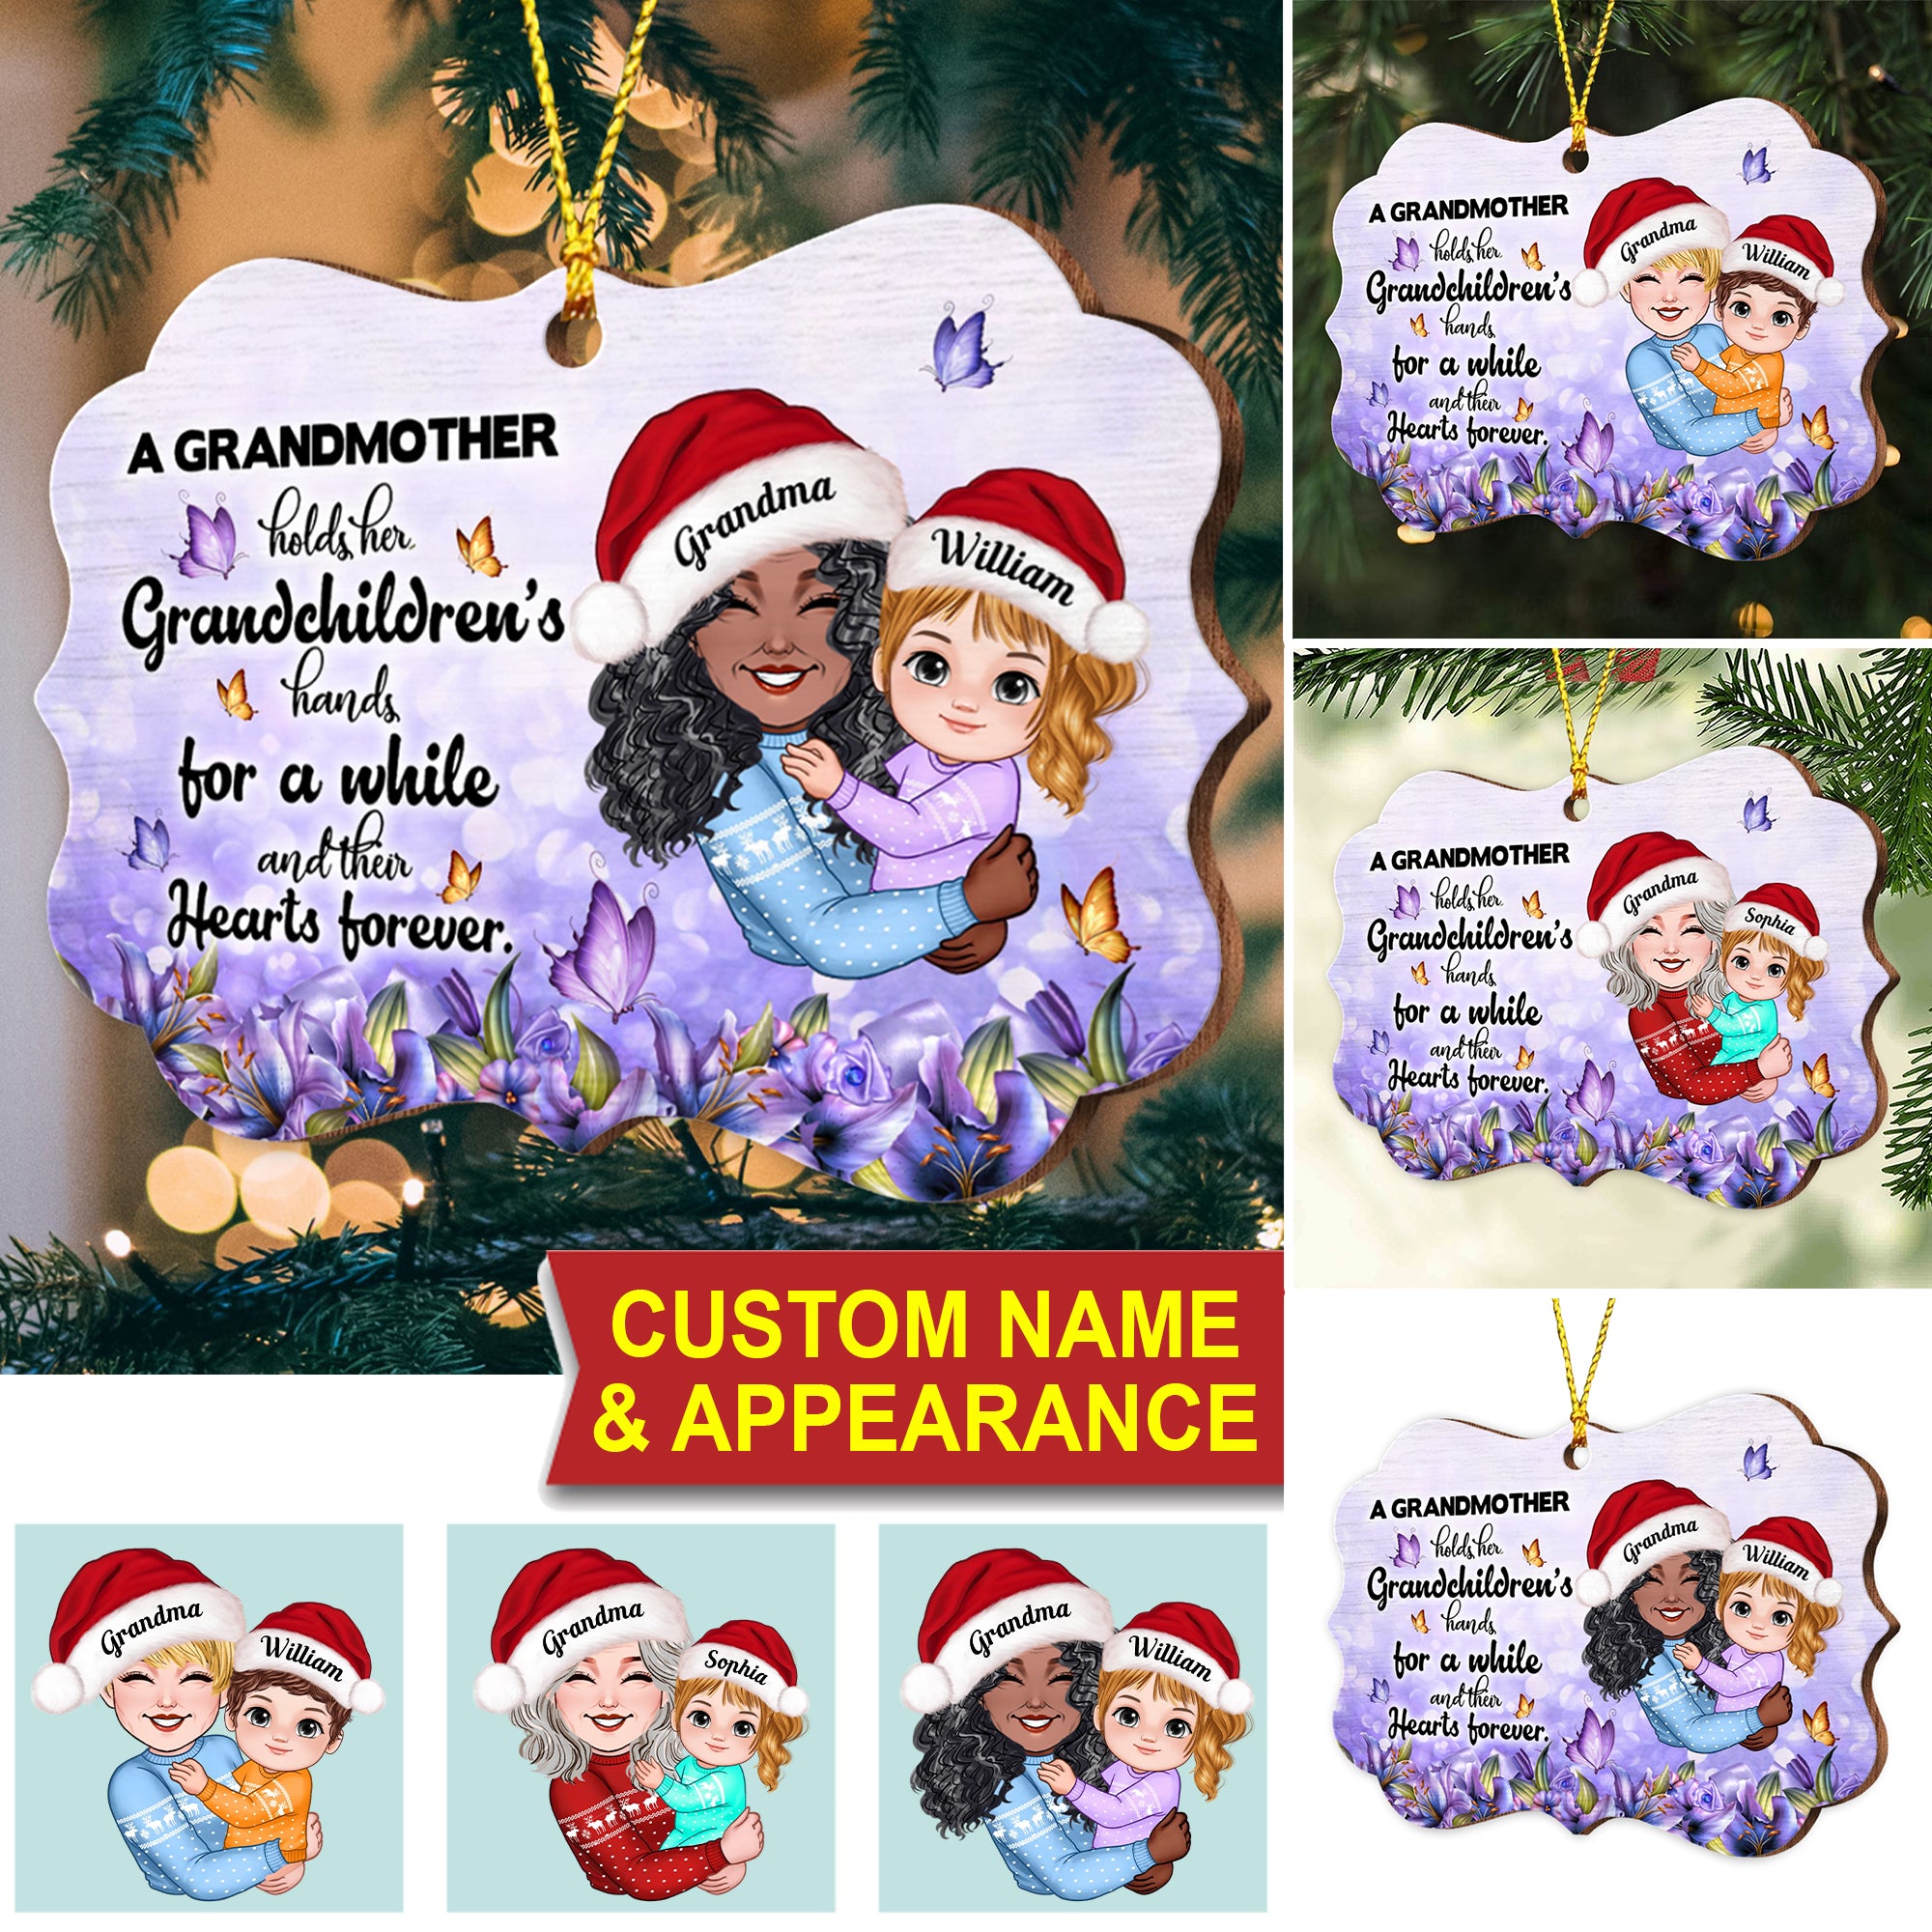 A Grandmother Holds Her Grandkid's Hand, Custom Appearances And Names - Personalized Custom Shaped Wooden Ornament - Gift For Family, Christmas Gift